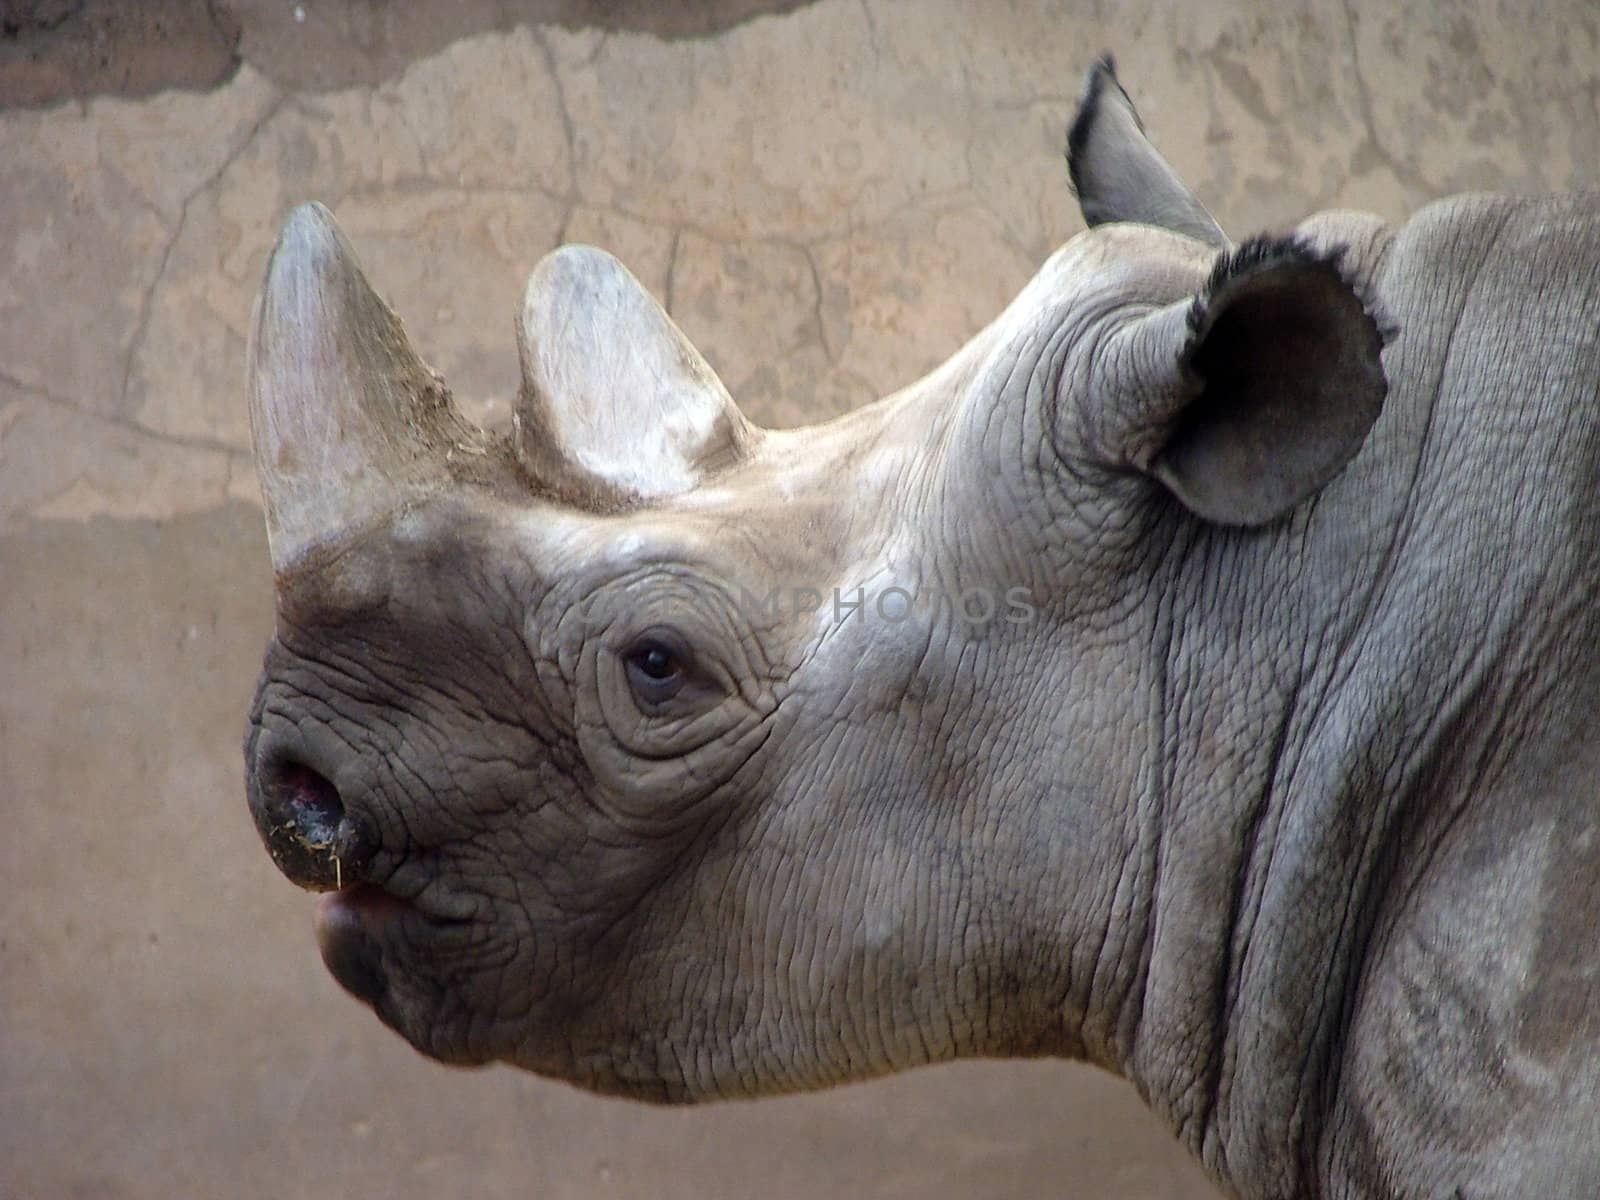 A rhino's head from the side